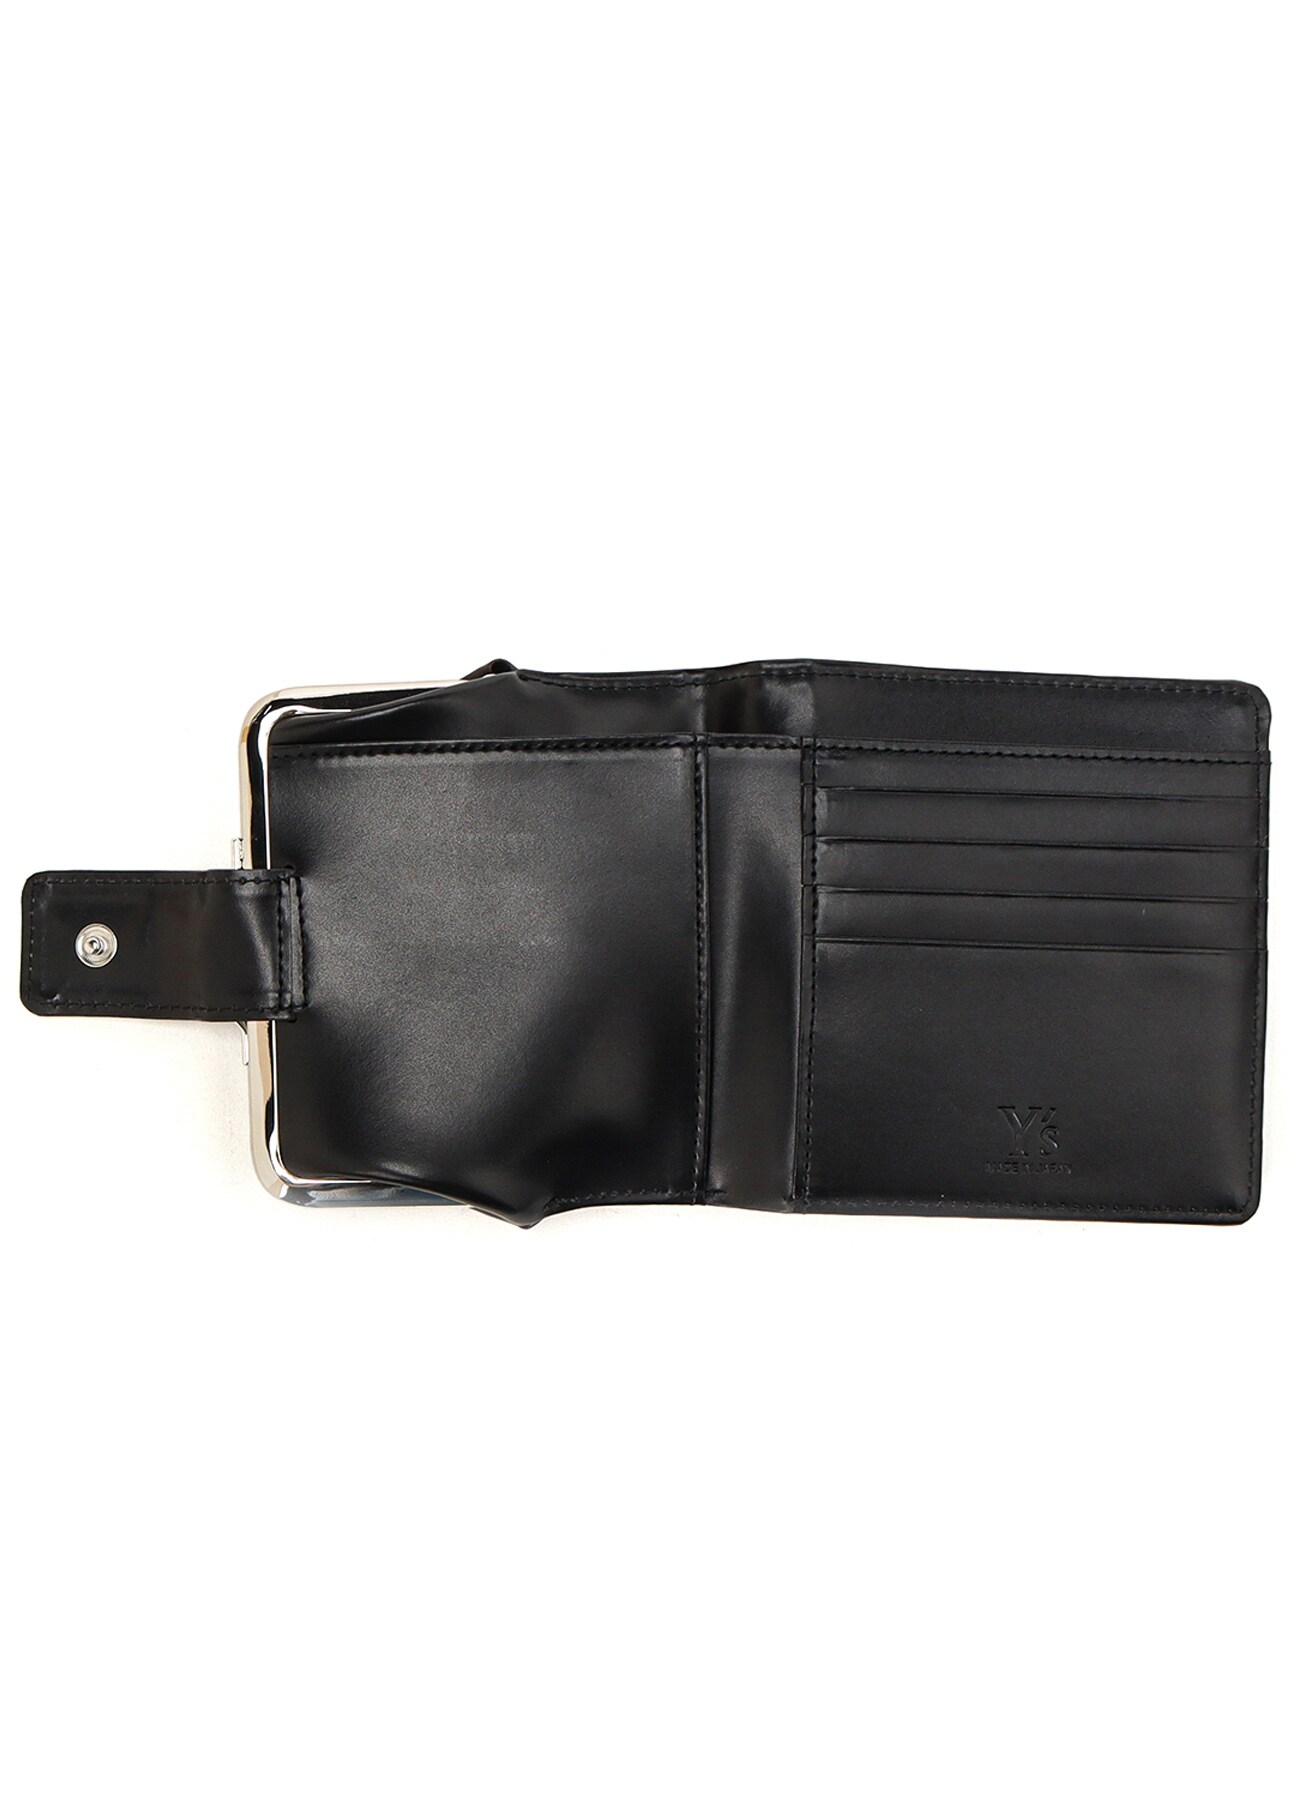 【7/26 12:00(JTS) Release】ADVANTIC LEATHER SMALL WALLET